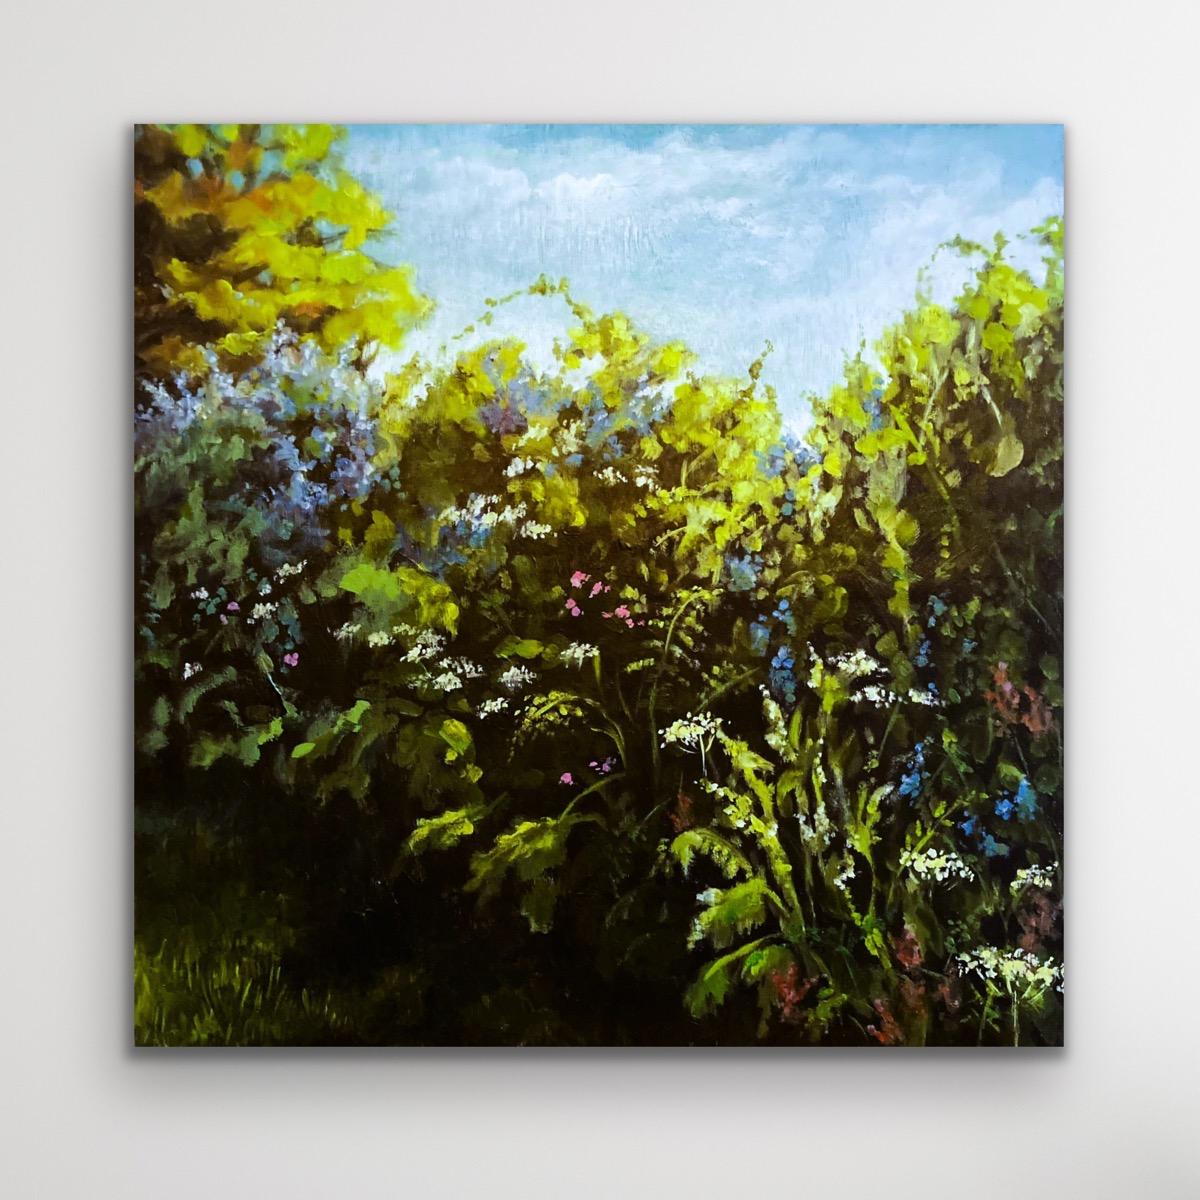 New Forest - Wild Garden Hedgerow, landscape, nature, floral - Painting by Nicky Bramble